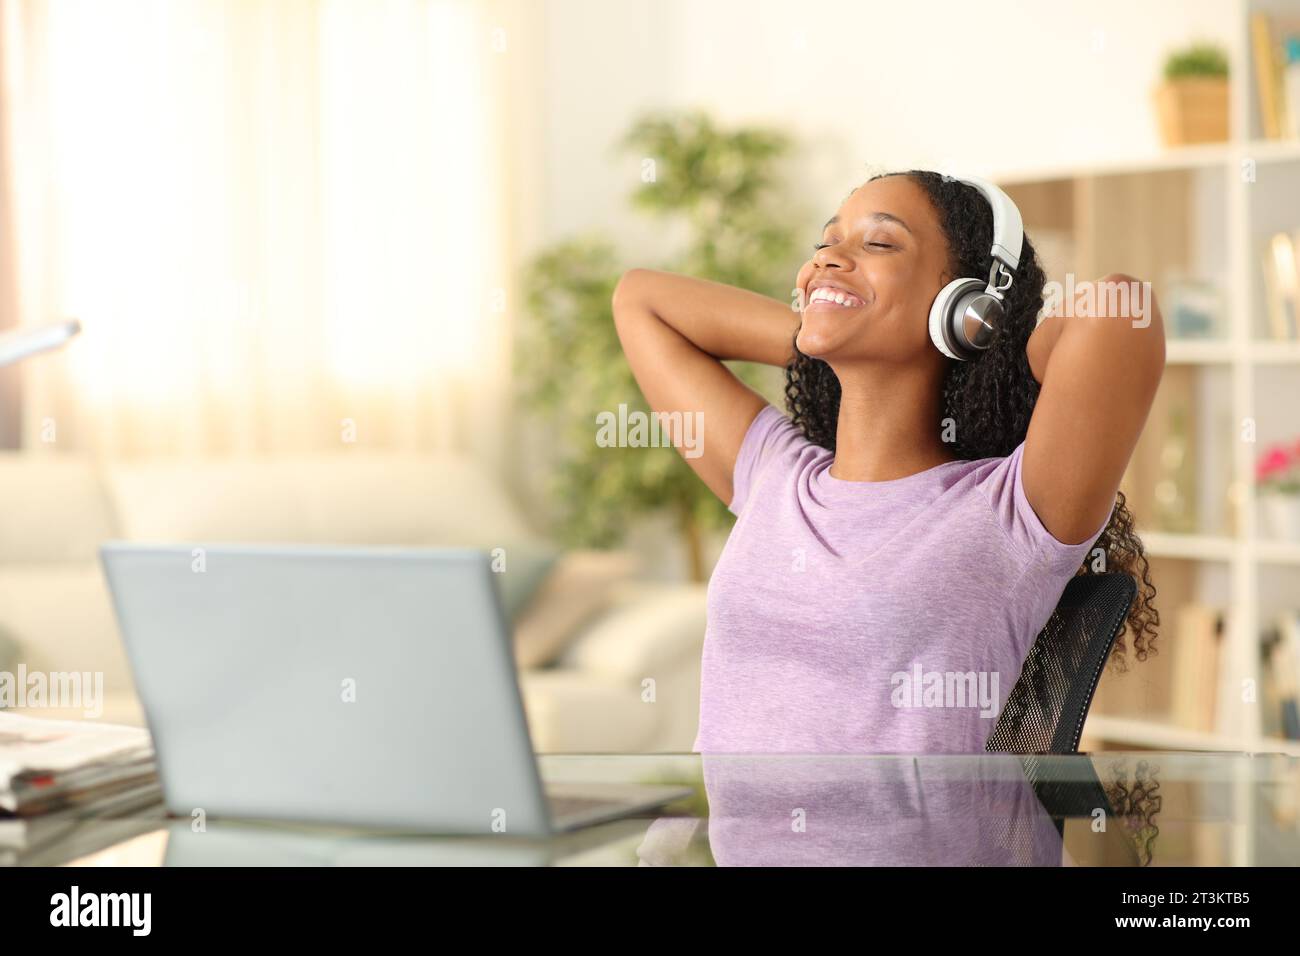 Happy black woman listening music with headphone and laptop relaxing sitting on a chair at home Stock Photo